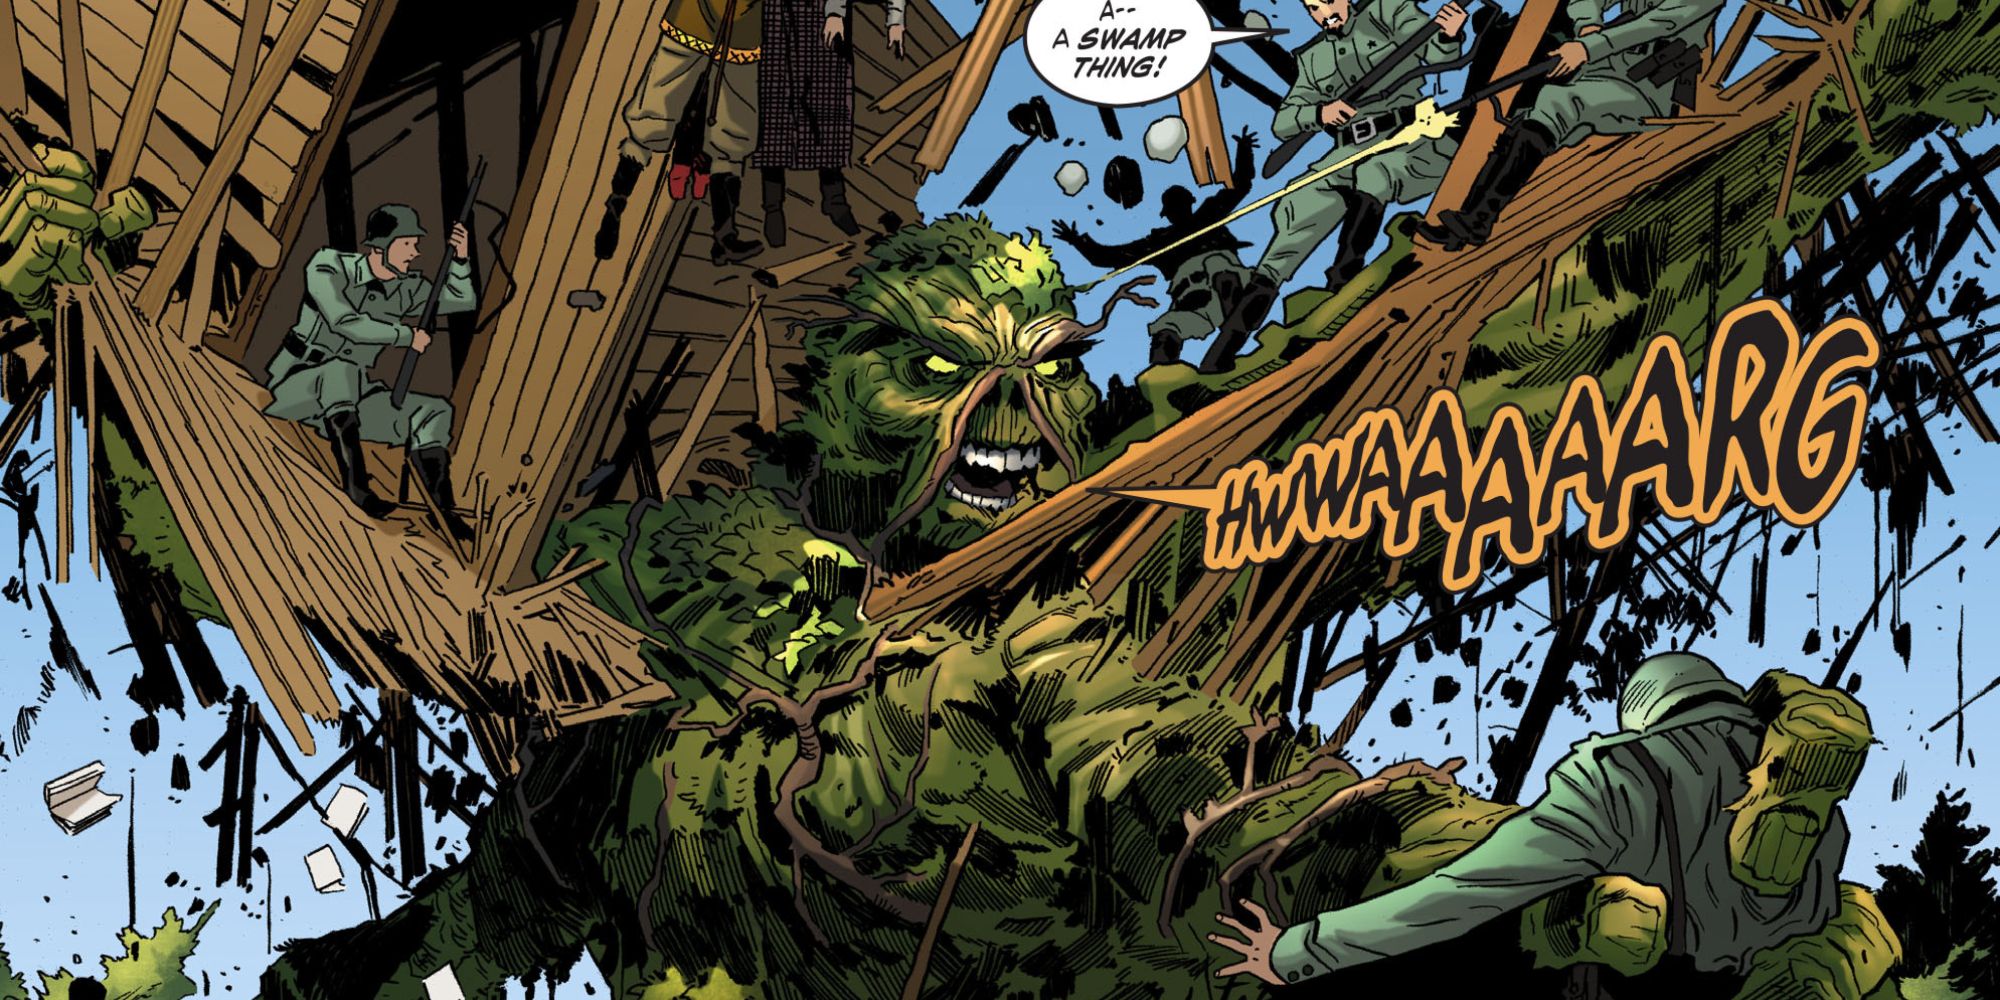 Swamp Thing attacks German soldiers in DC Bombshells comics.